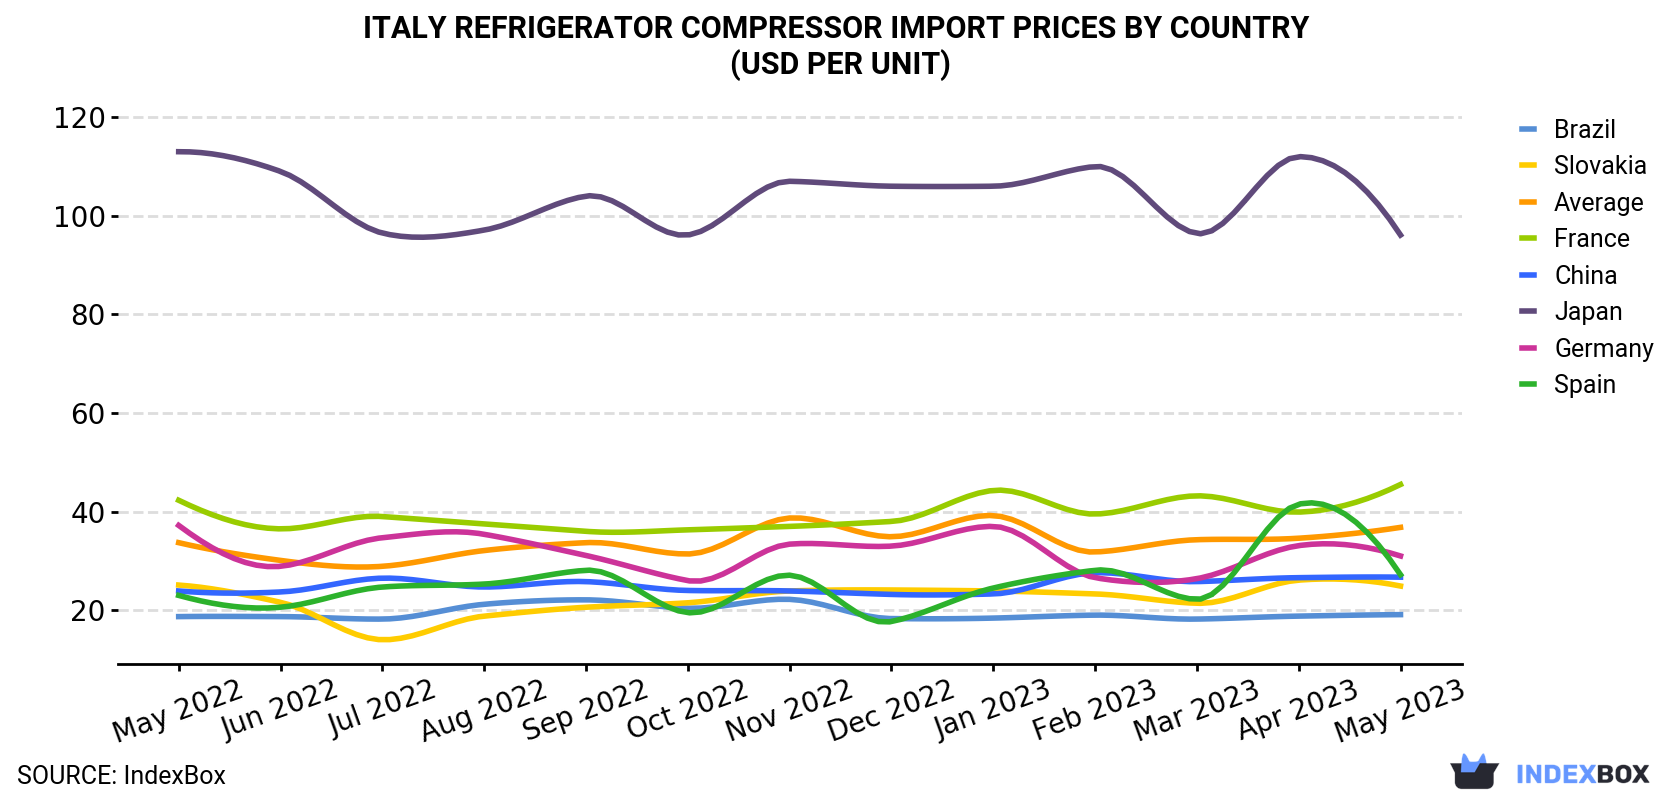 Italy Refrigerator Compressor Import Prices By Country (USD Per Unit)